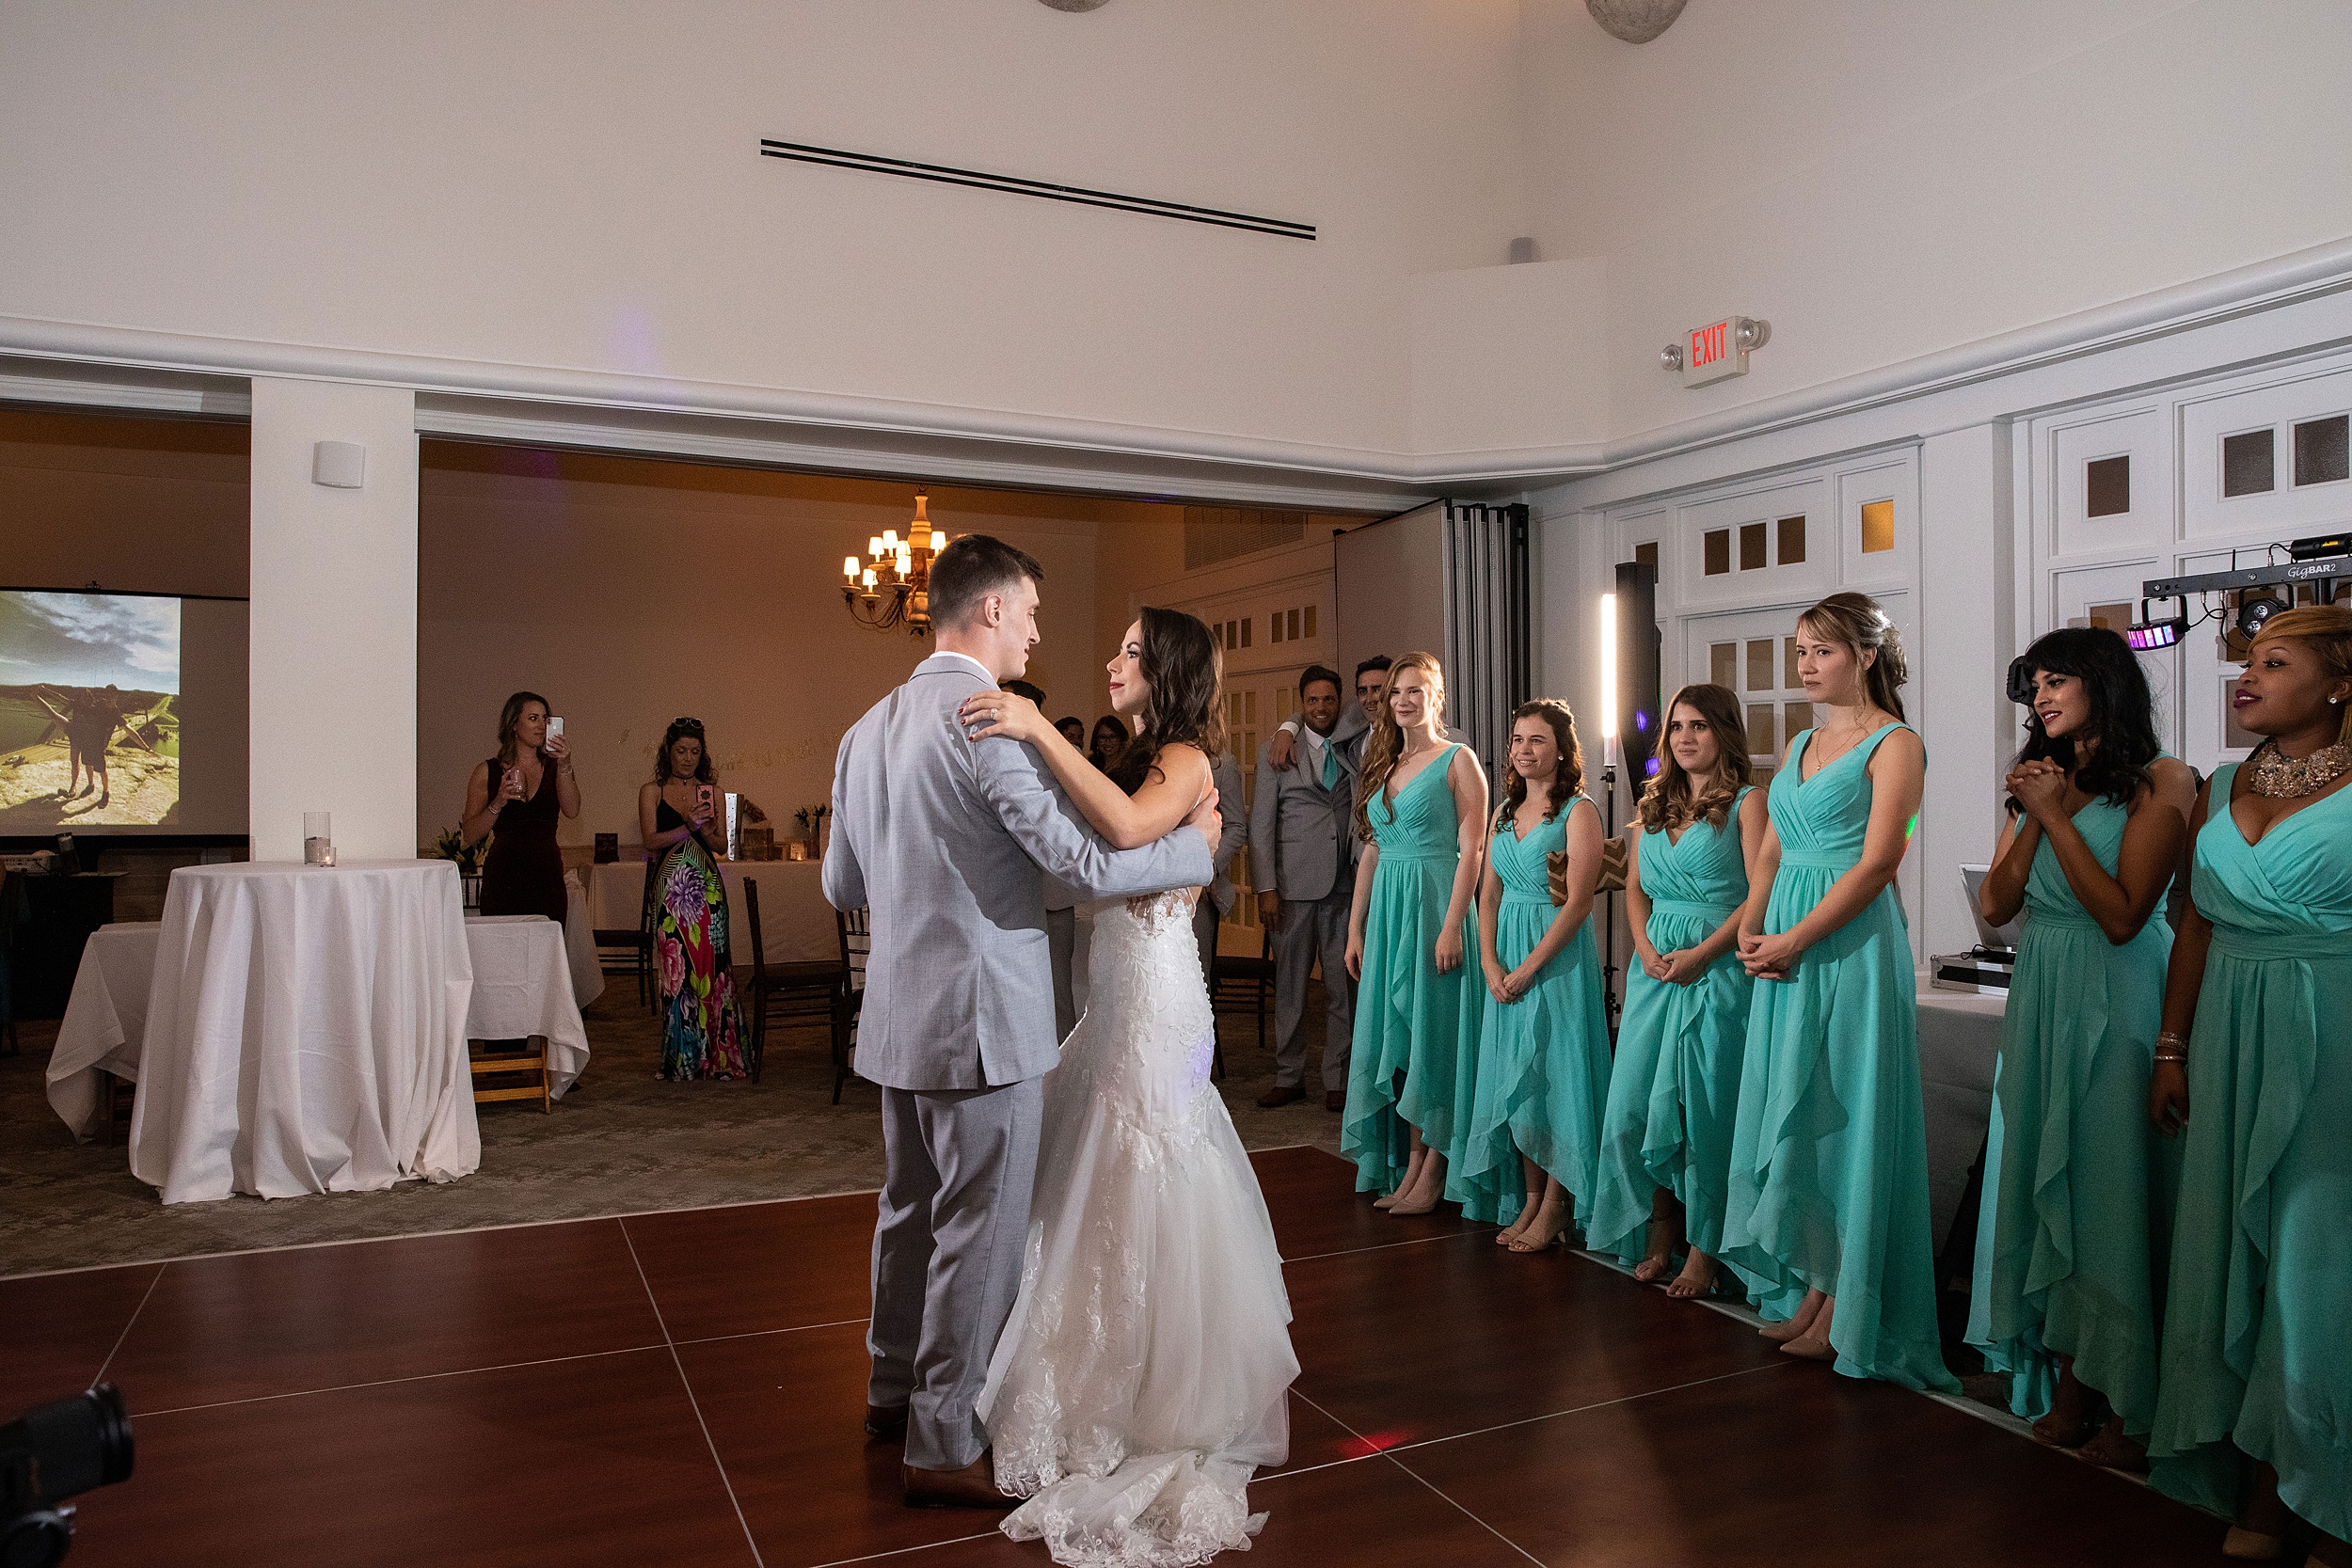 Newlyweds dance close during their first dance as the wedding party looks on